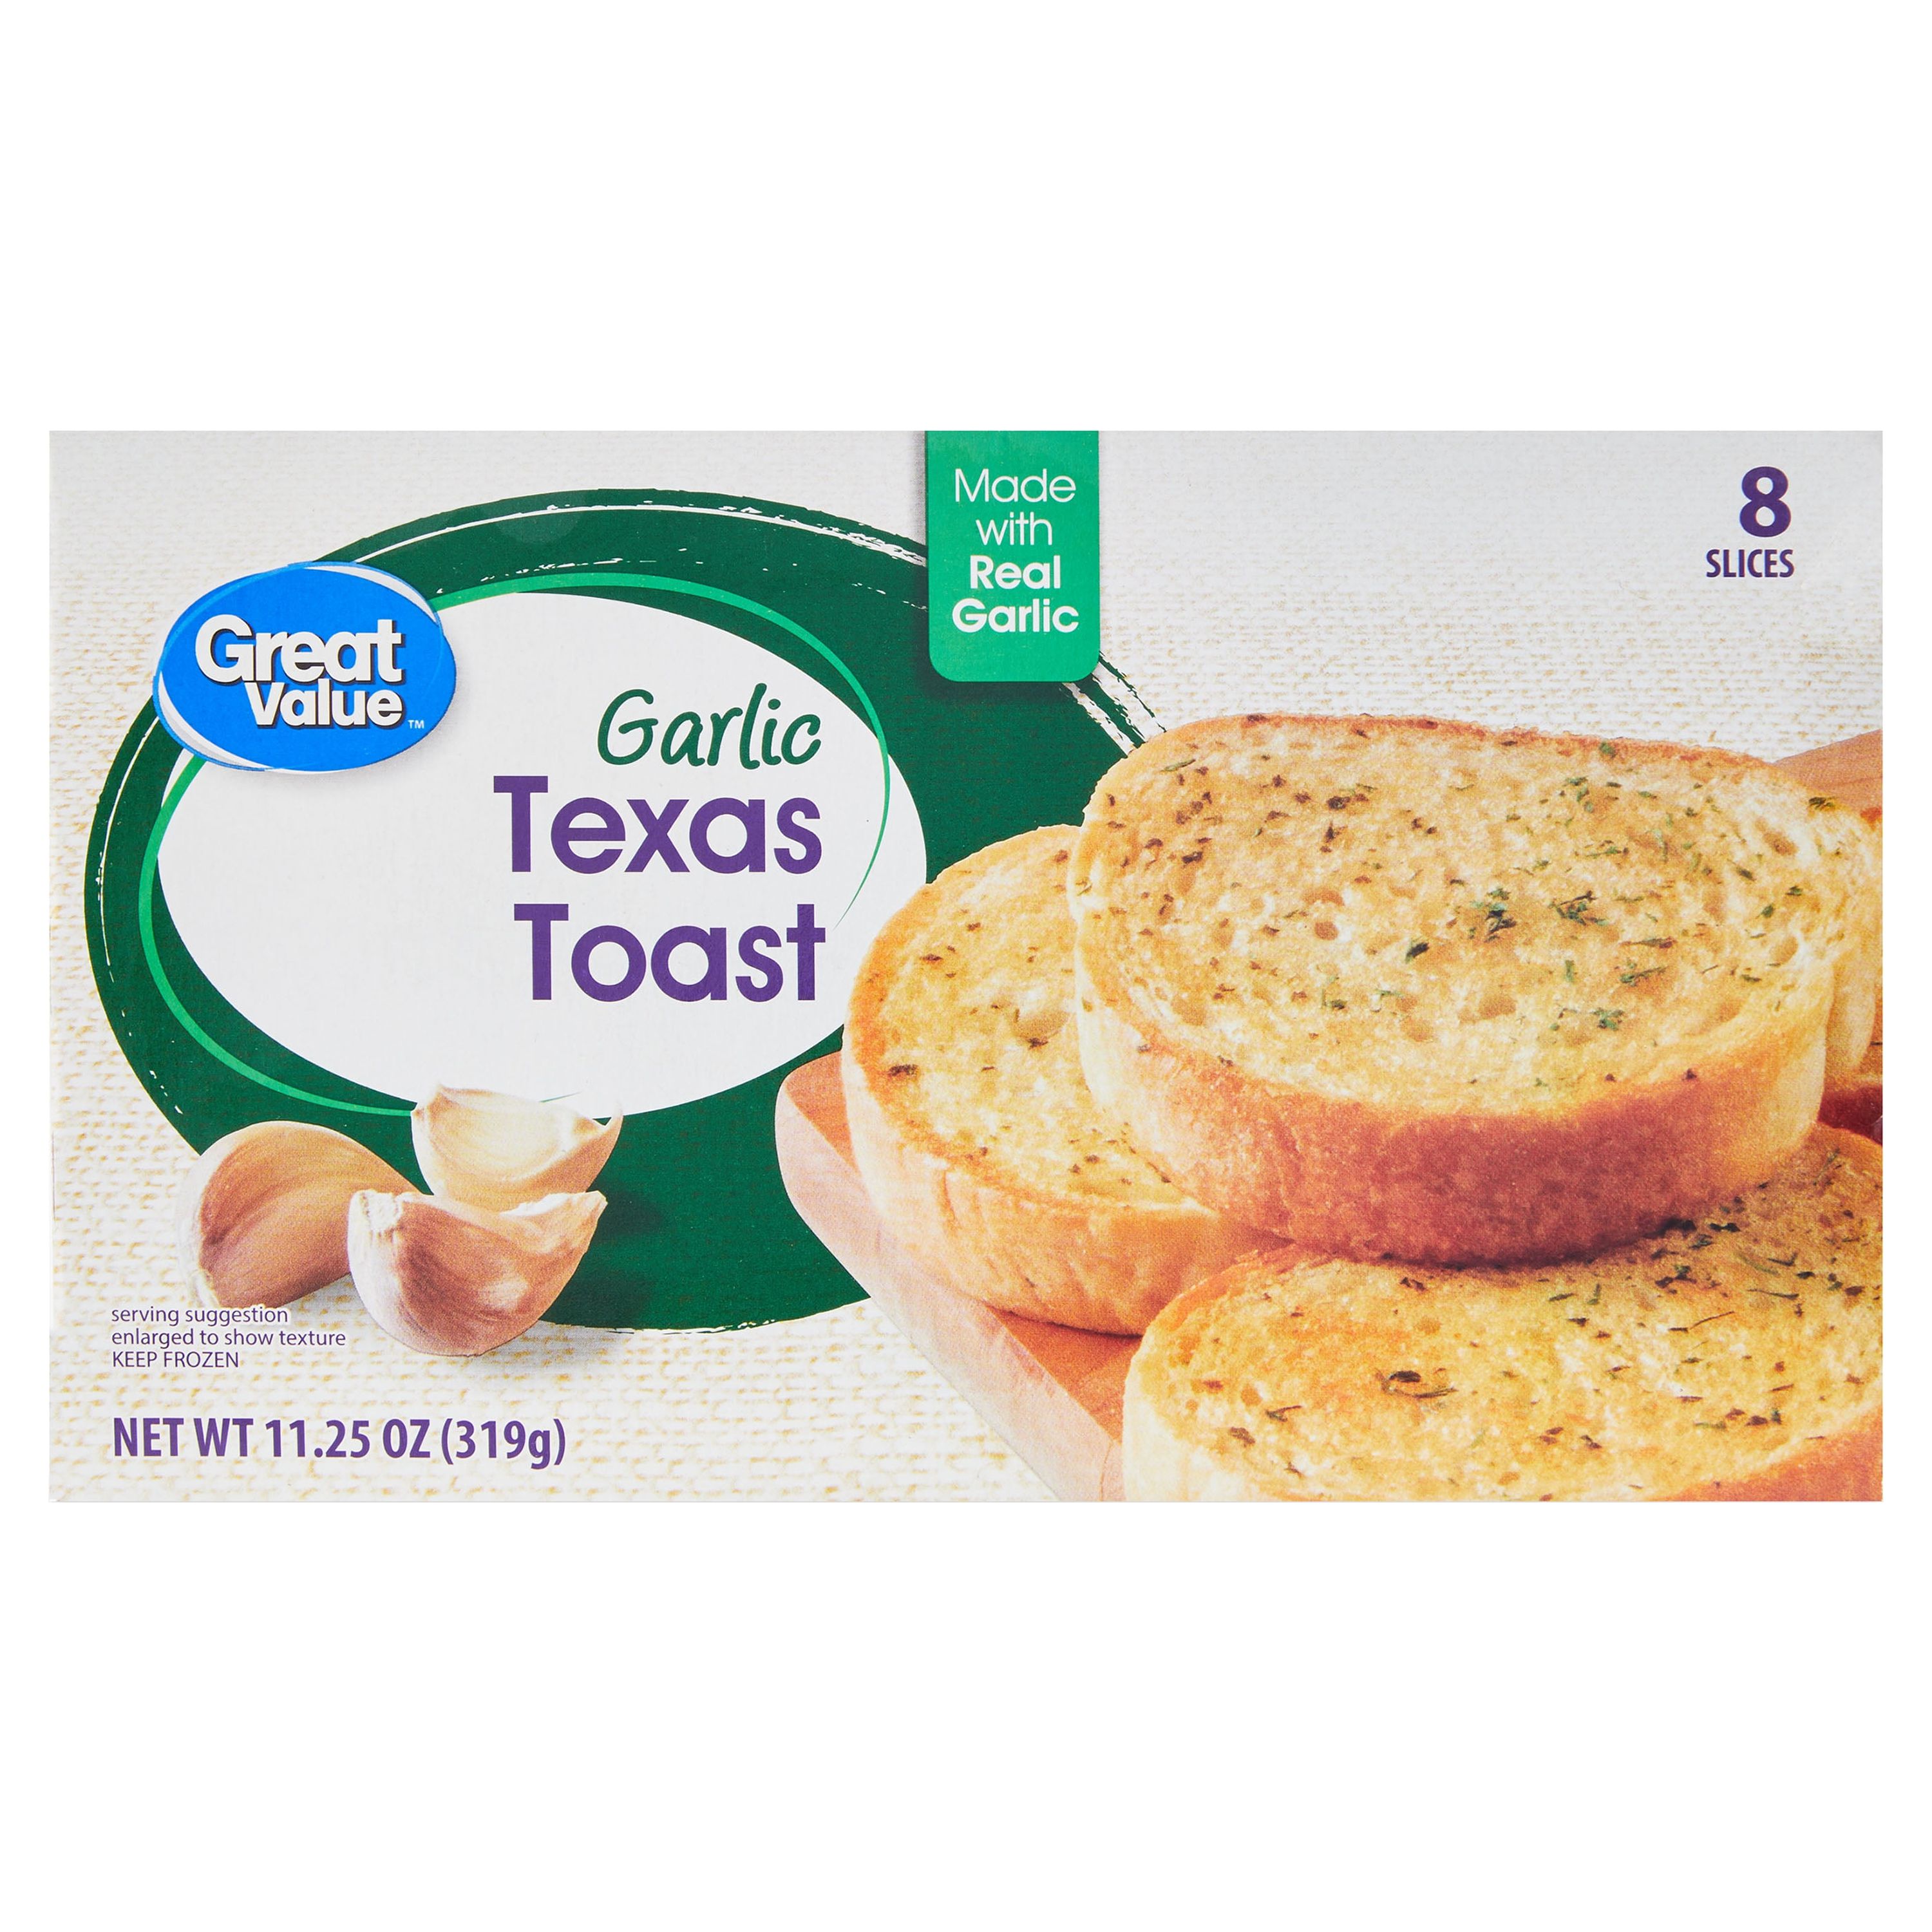 Great Value Garlic Texas Toast, 11.25 oz, 8 Count - image 1 of 9